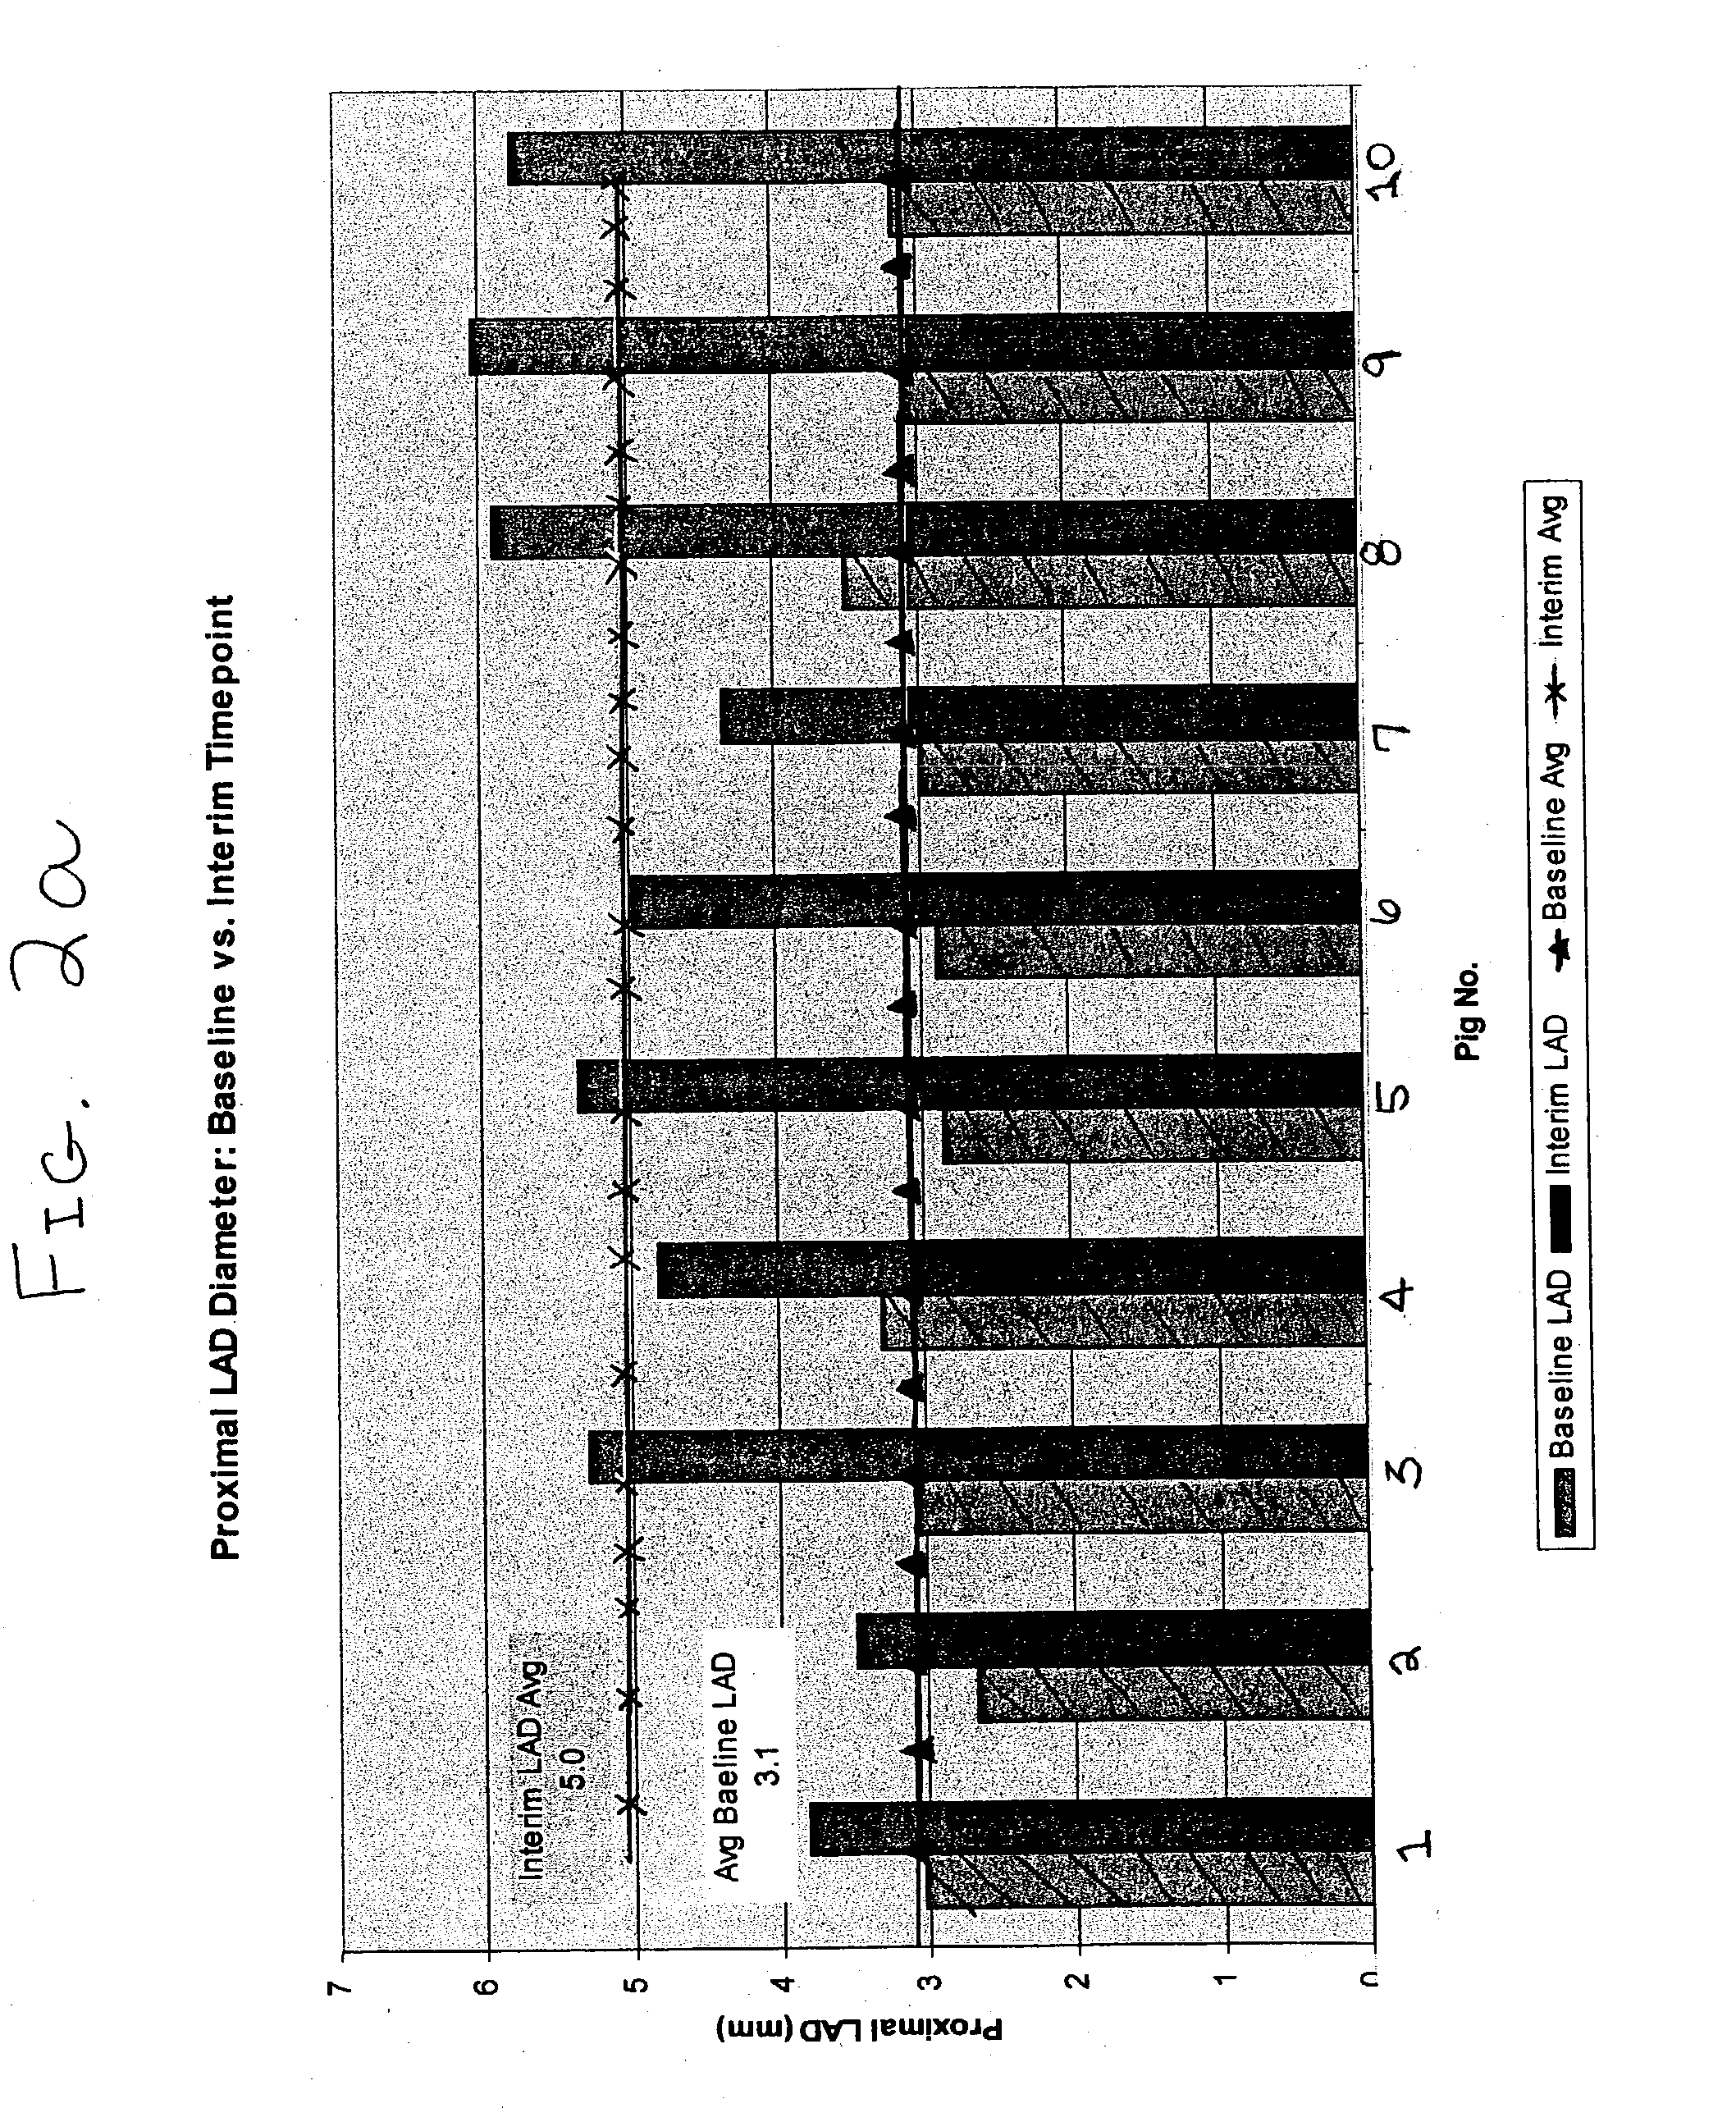 Methods for inducing vascular remodeling and related methods for treating diseased vascular structures